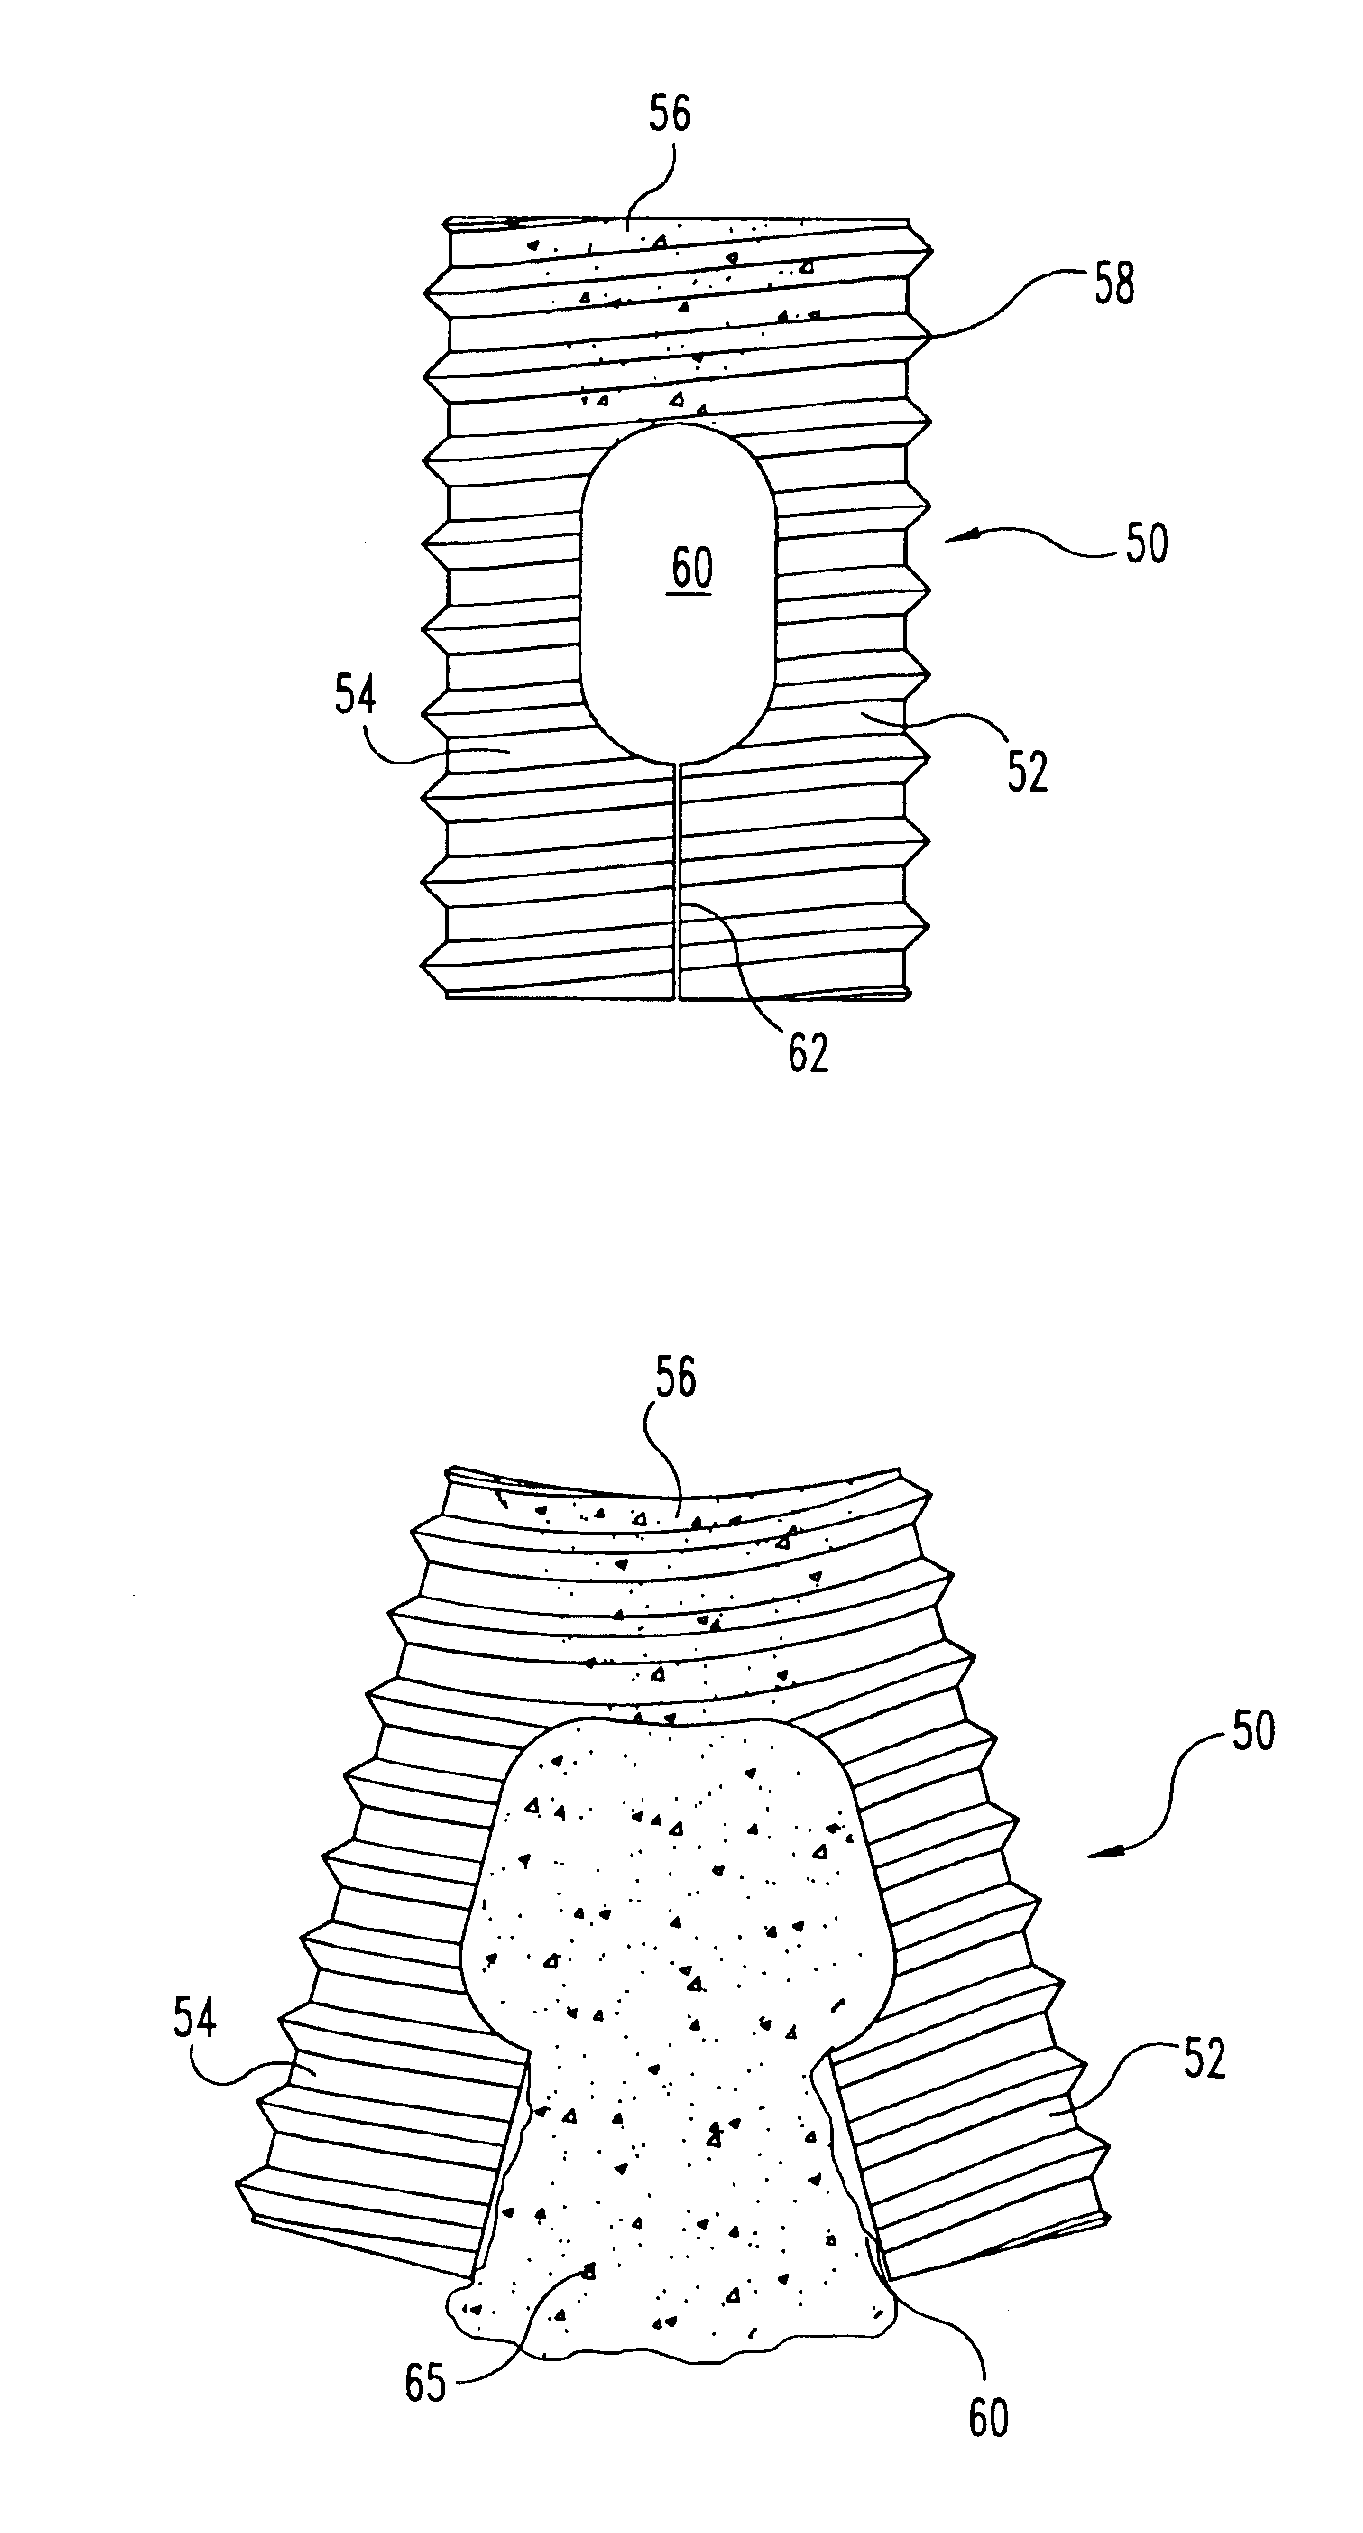 Flexible implant using partially demineralized bone